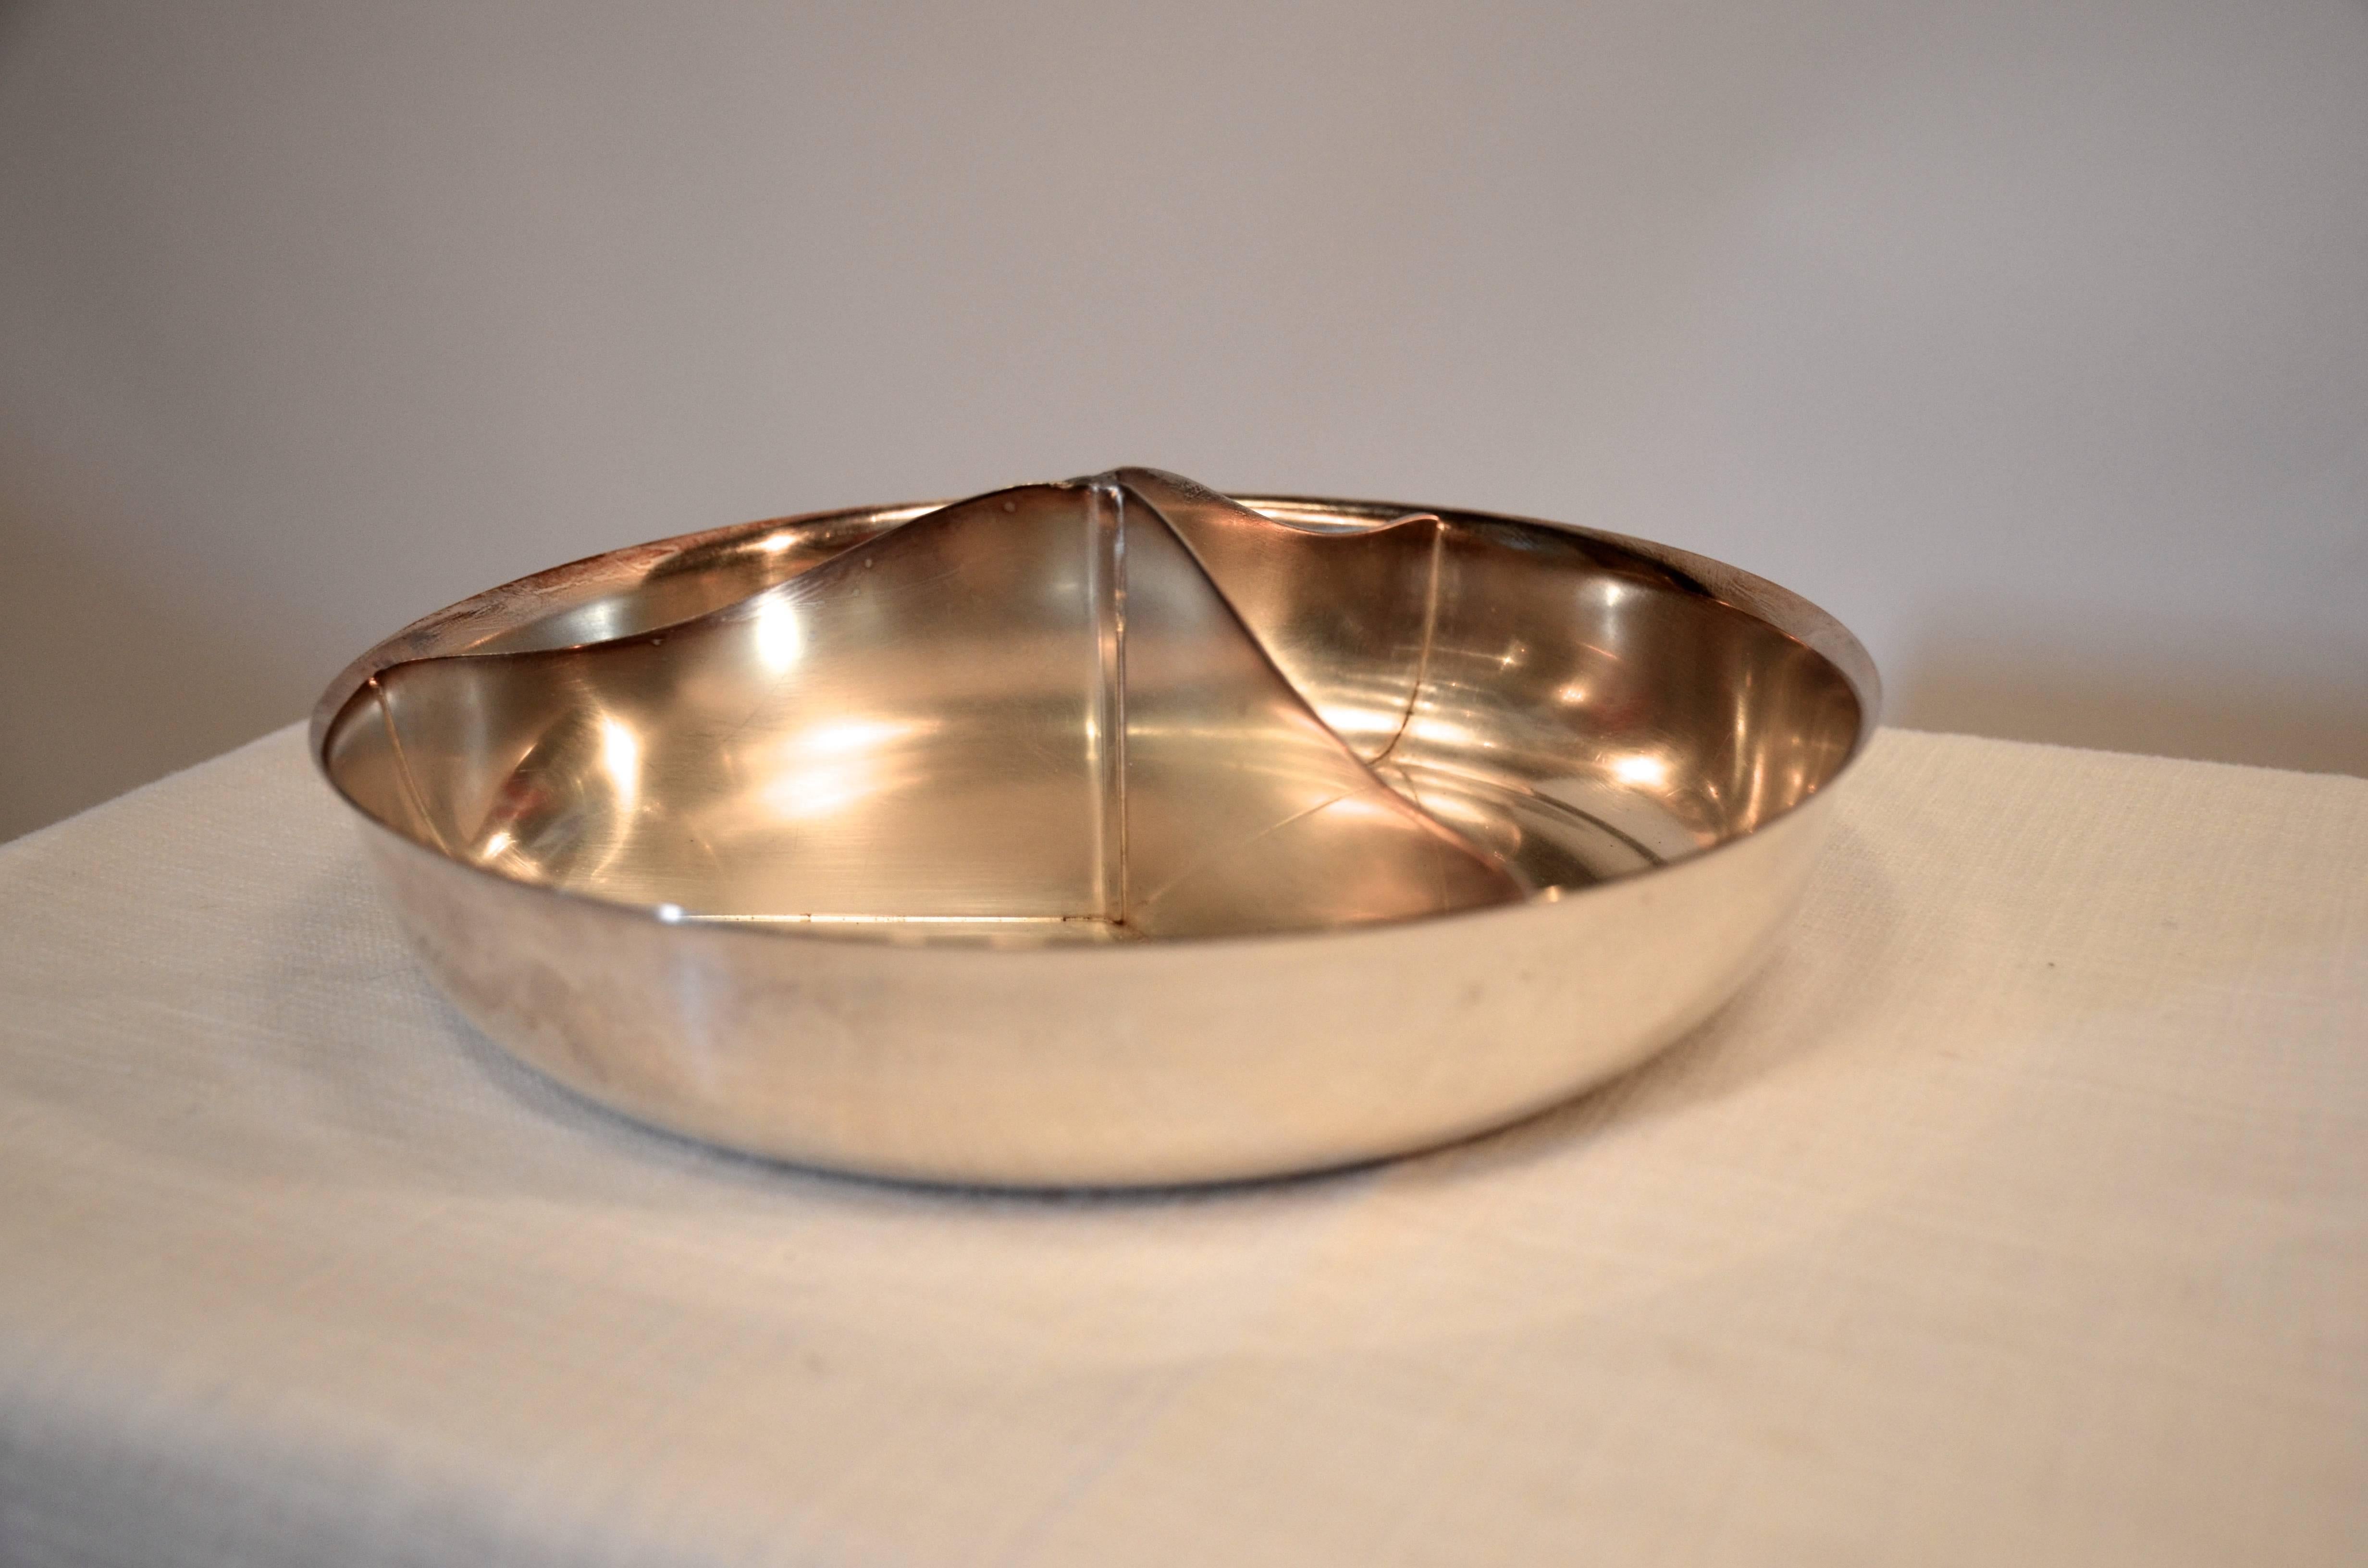 Silver Divided Snack Bowl In Good Condition For Sale In Southampton, NY